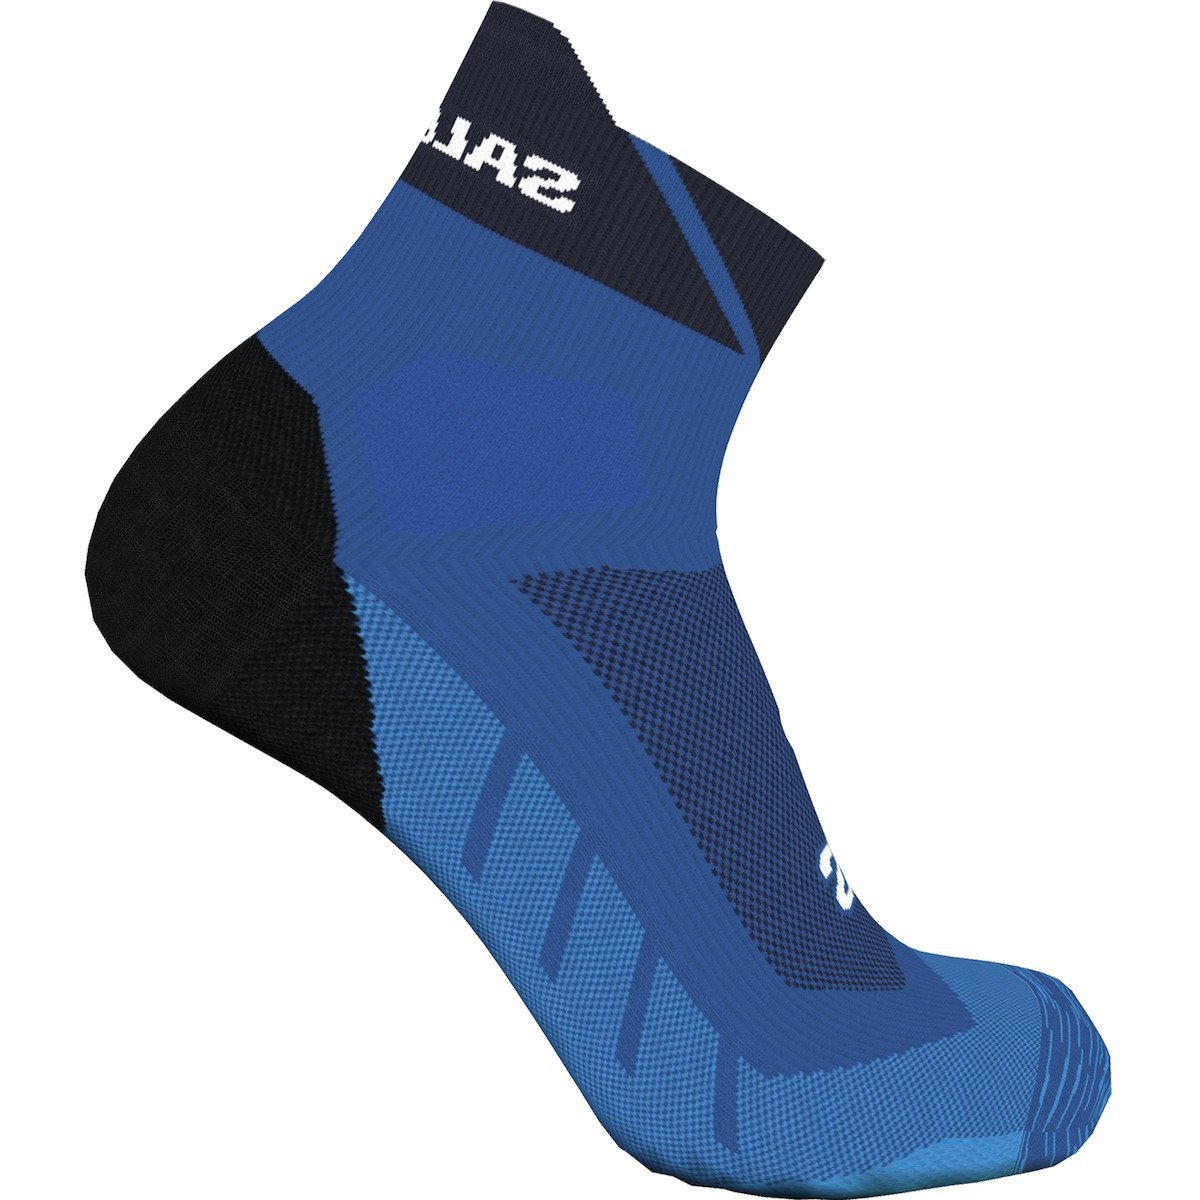 LC2165200_0_VIR_SPEEDCROSS-ANKLE_FRENCH-BLUE_CARBON_IBIZA.png.high-res